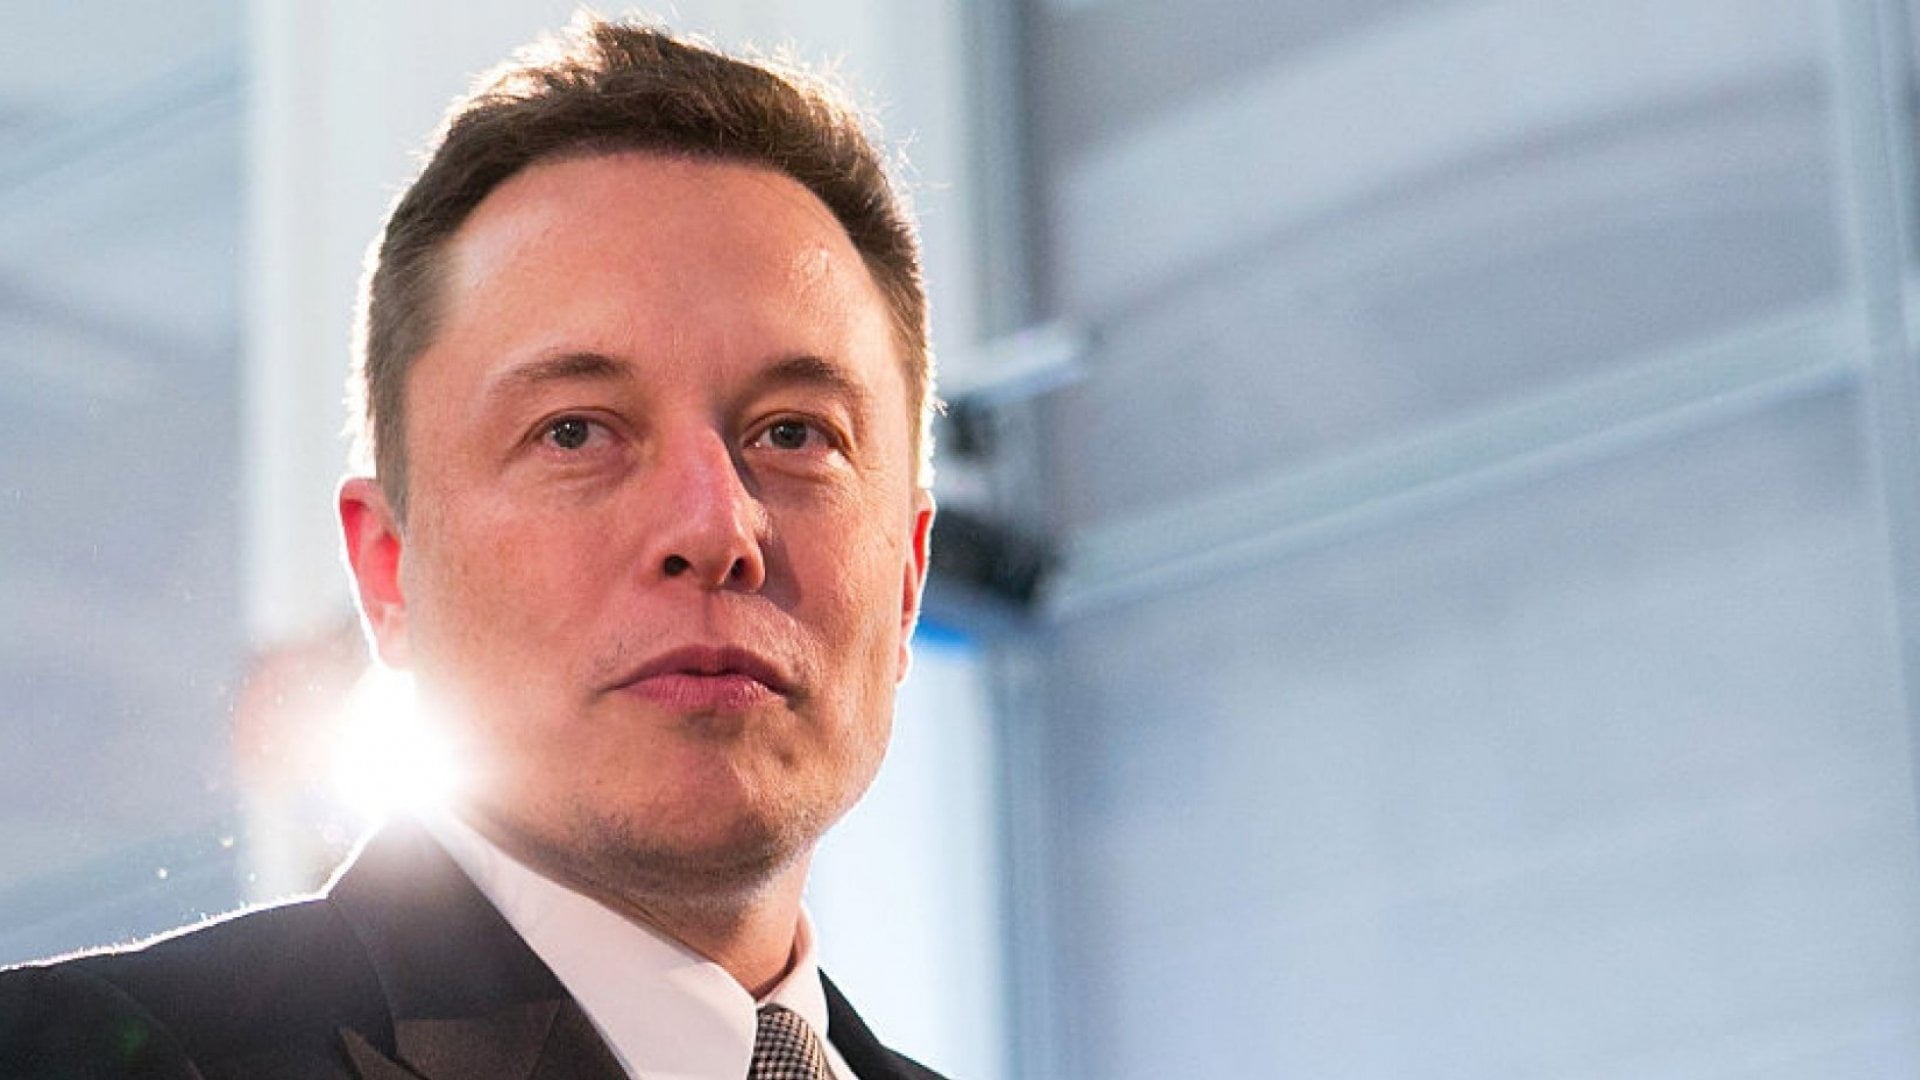 Elon Musk is now the second richest man in the world